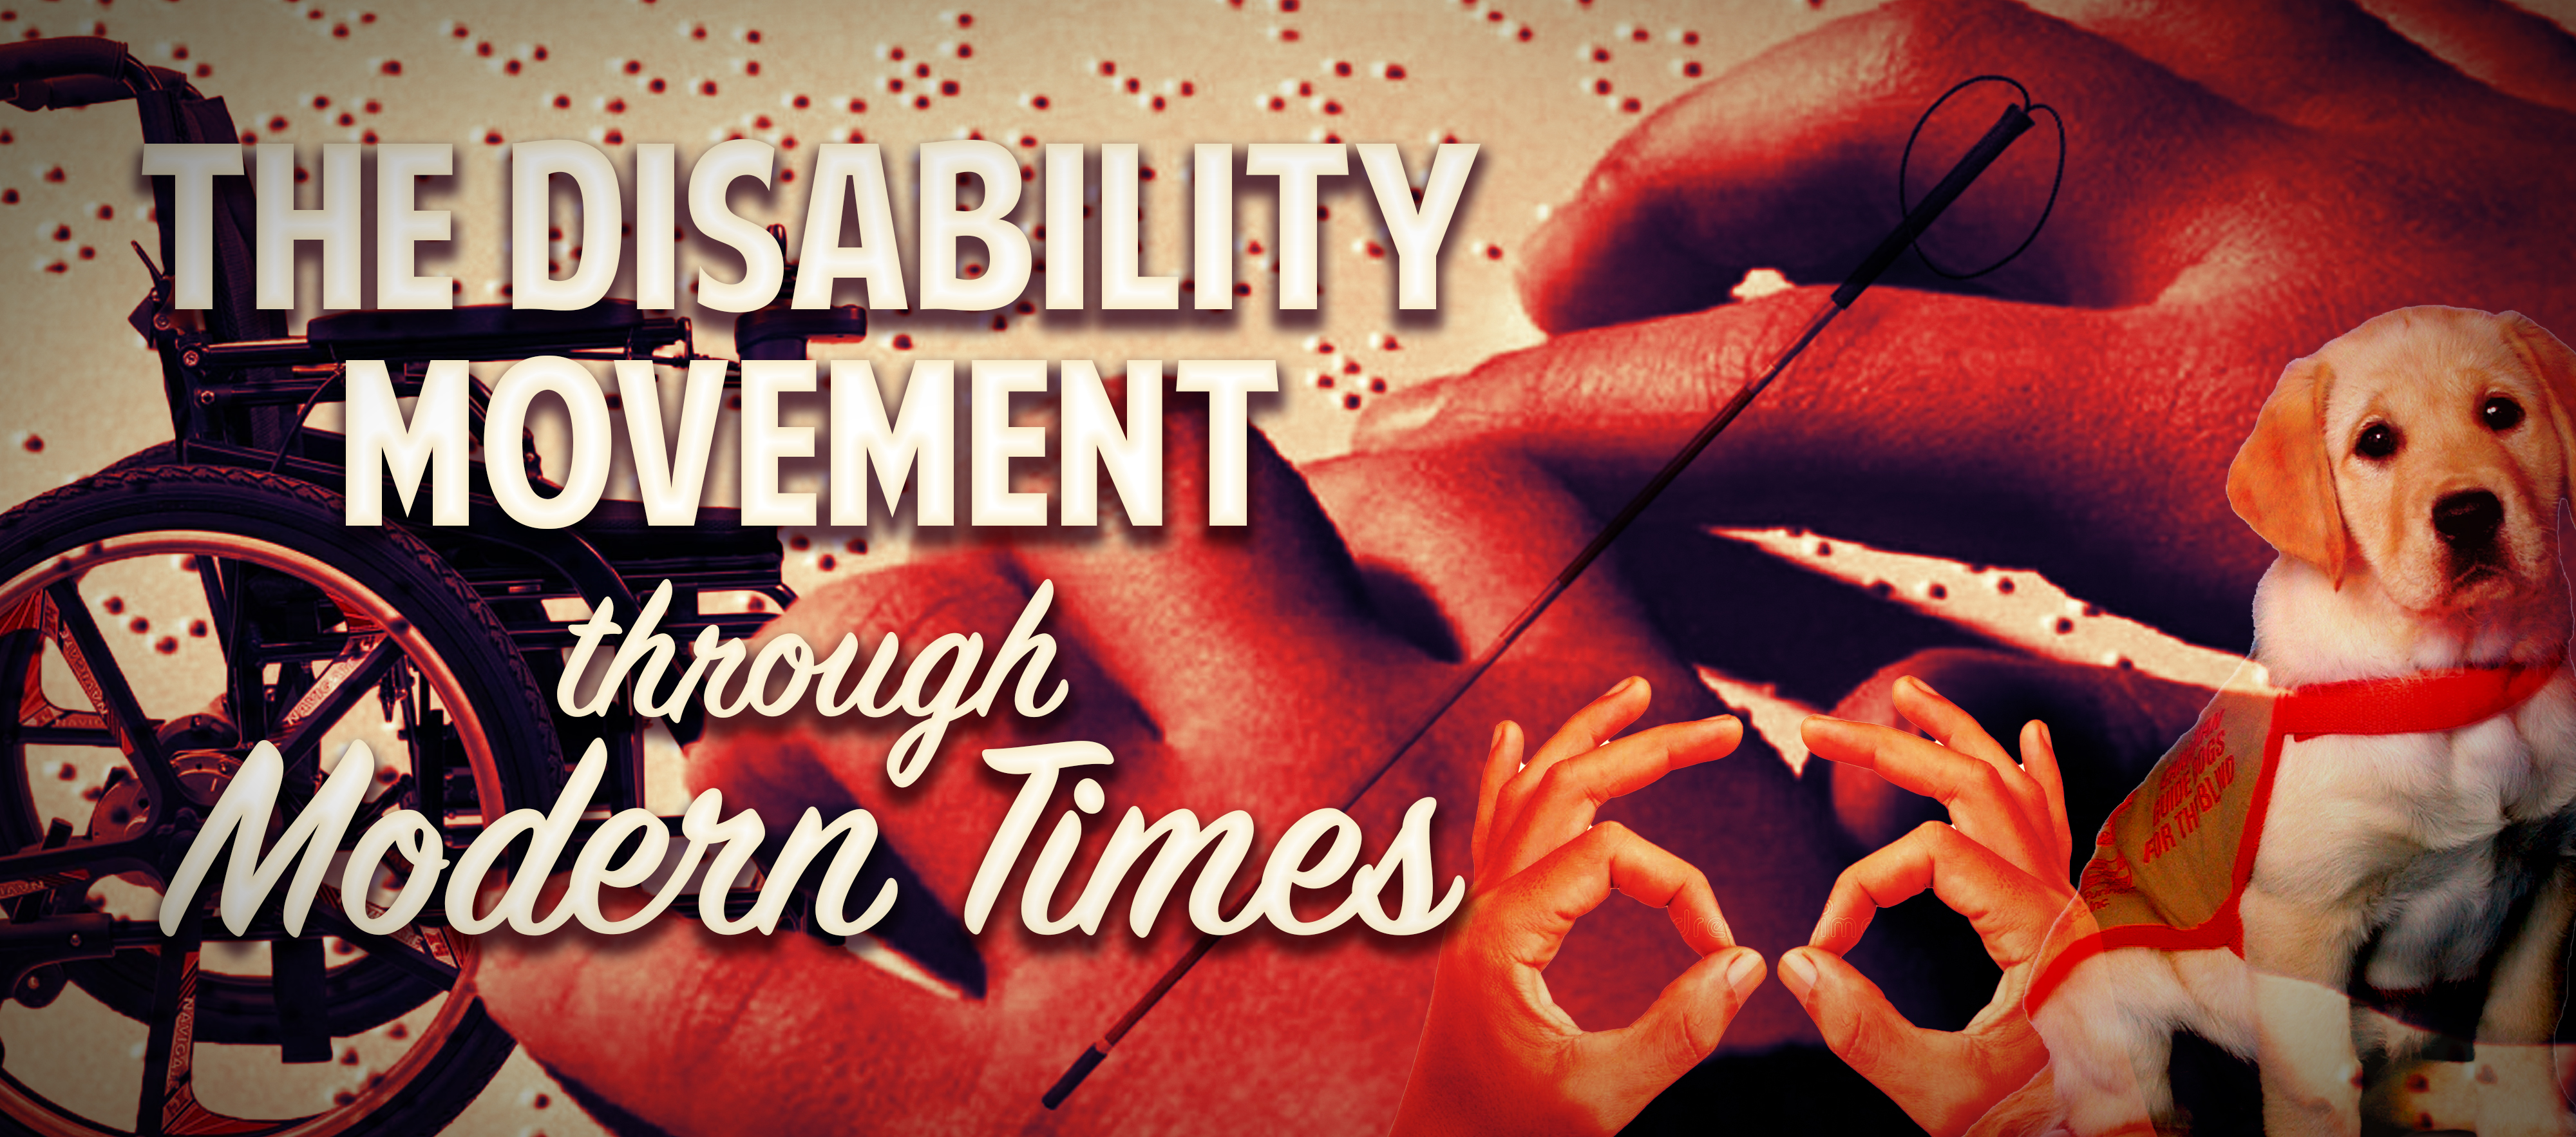 The Disability Movement through Modern Times